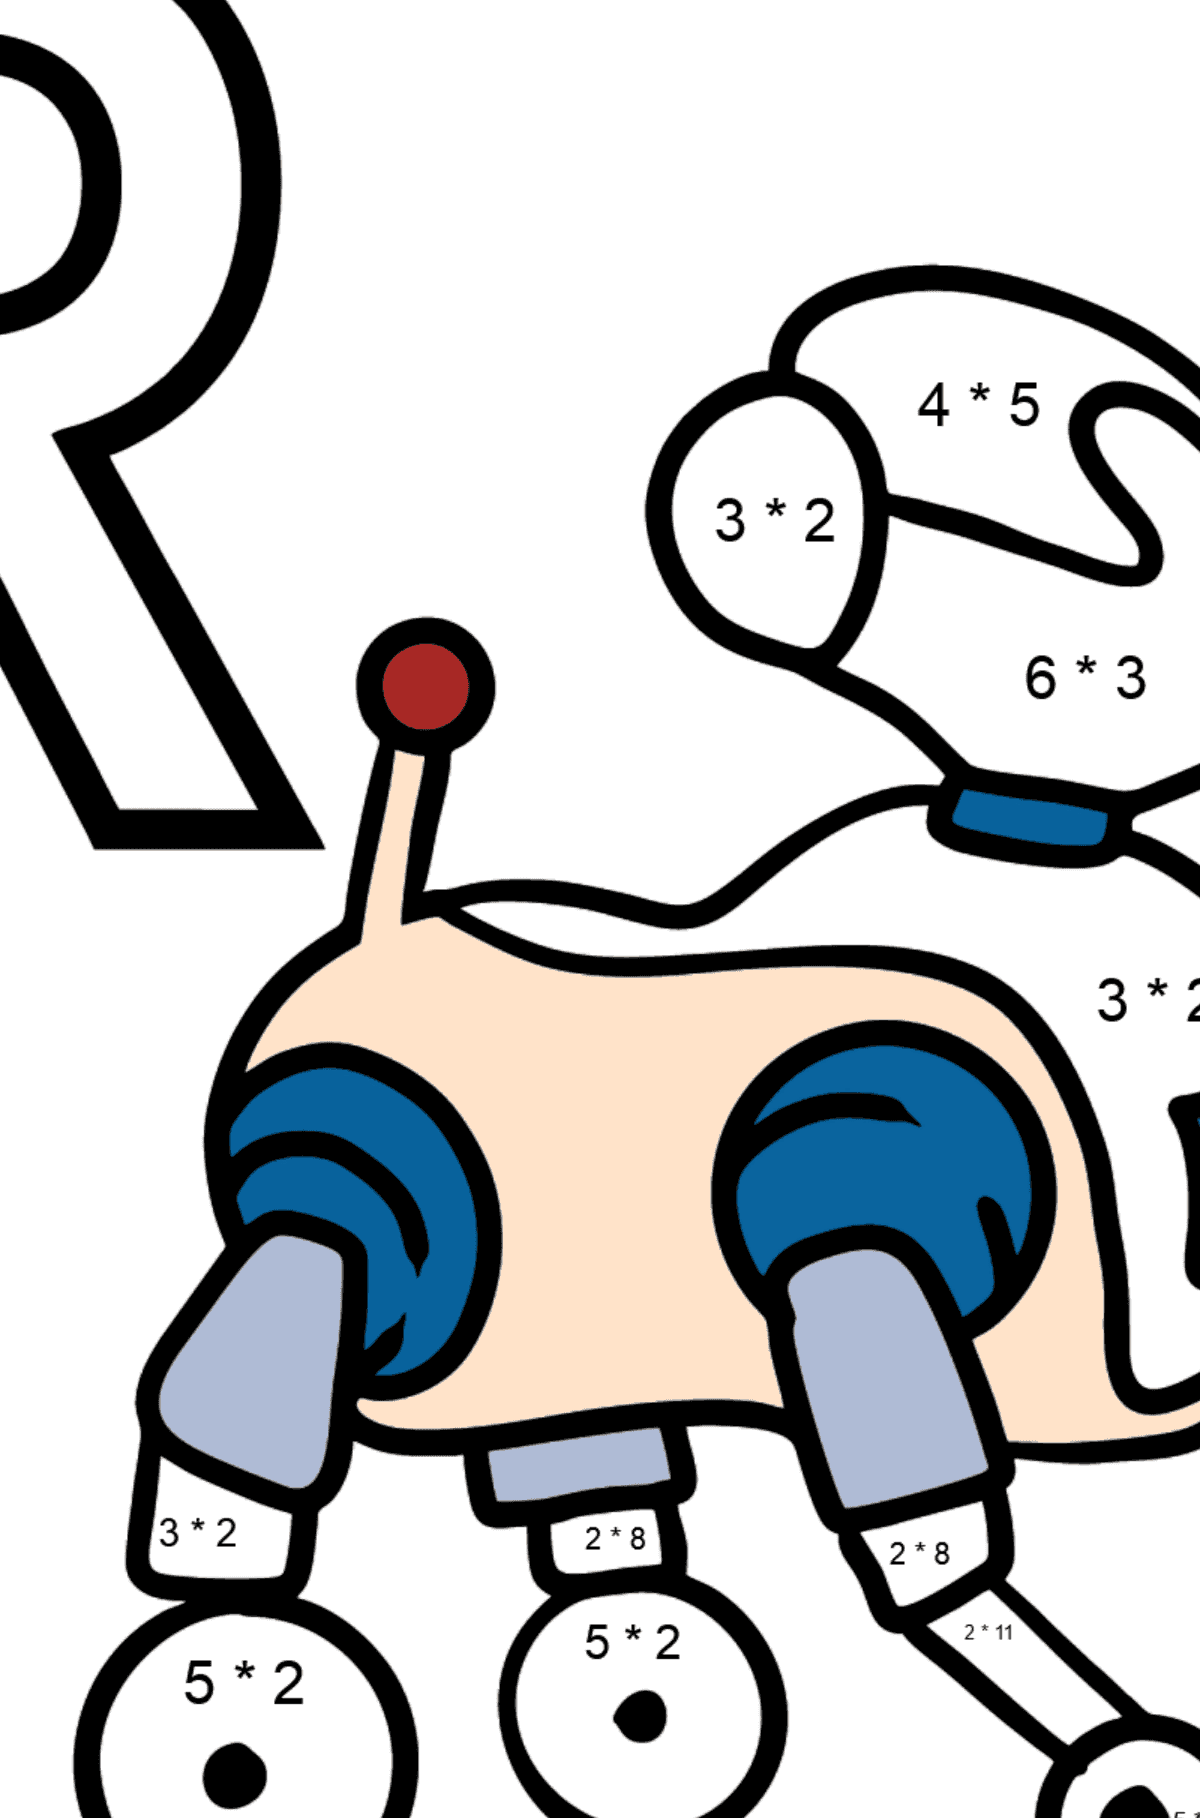 English Letter R coloring pages - ROBOT - Math Coloring - Multiplication for Kids